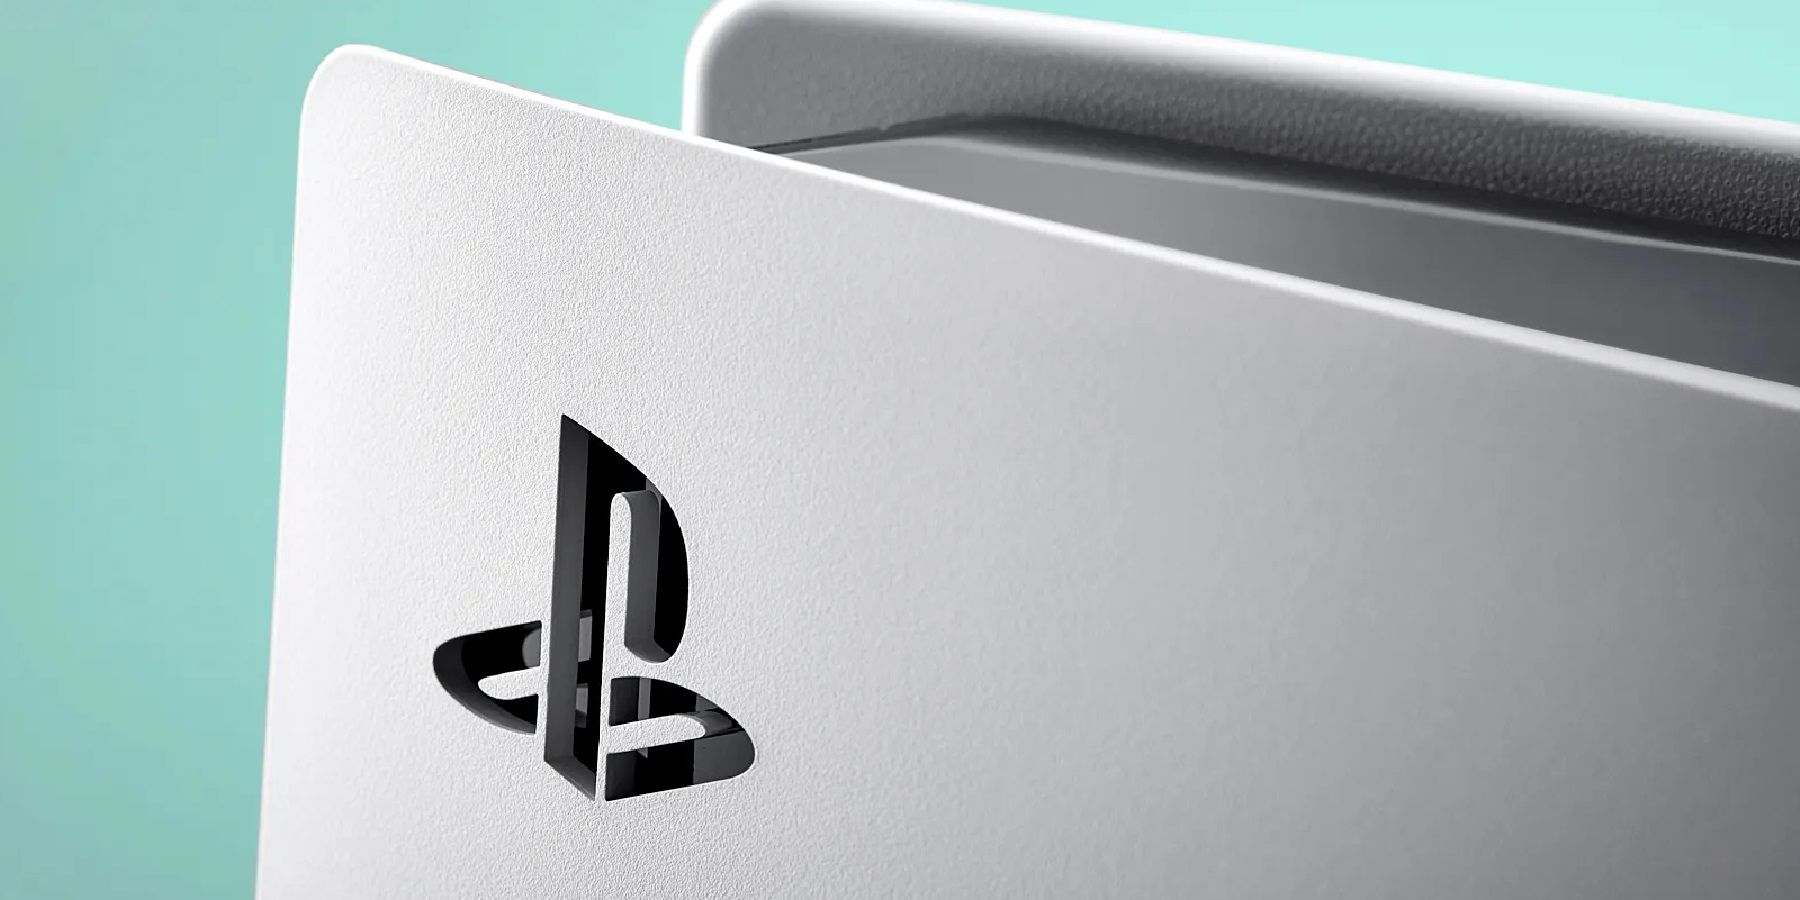 PlayStation Plus Reports Big Loss Since Revamp